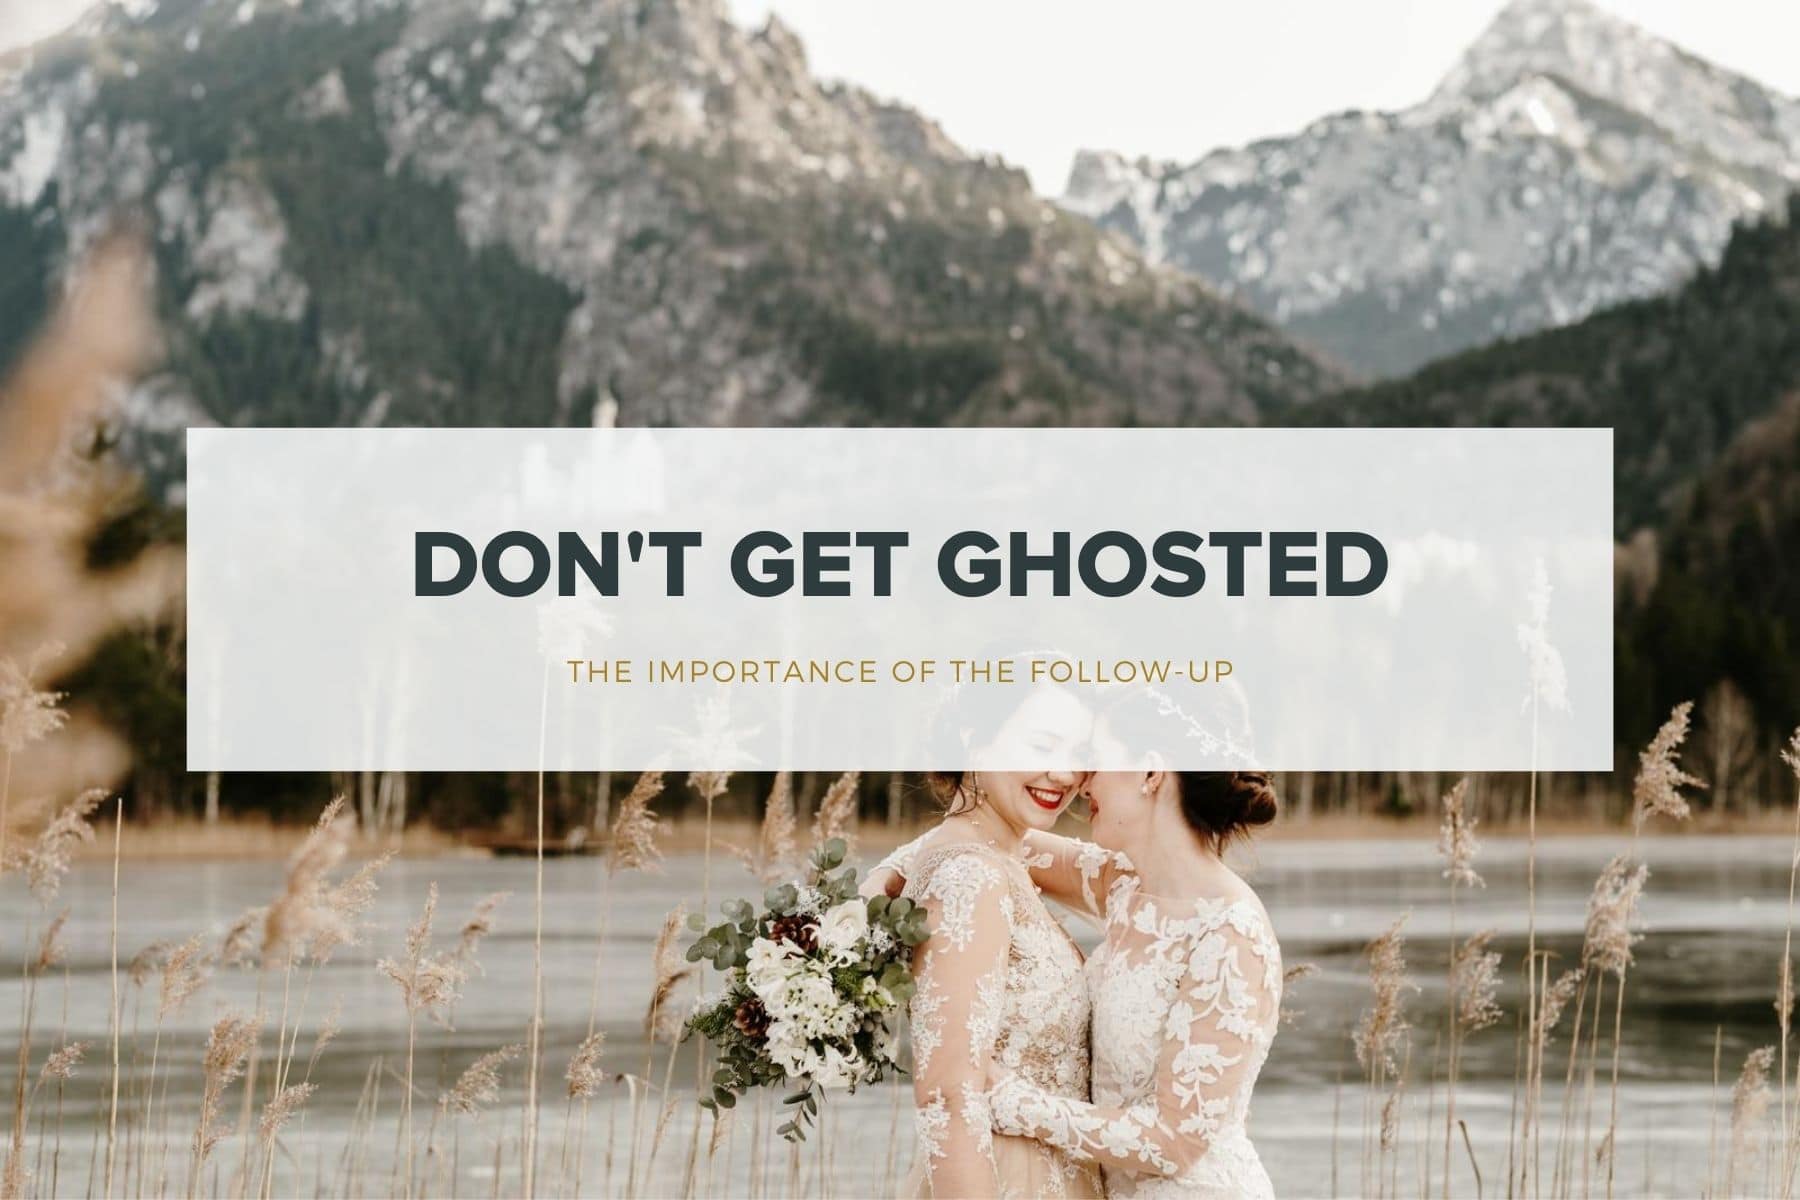 Don't get ghosted - the art of the follow up